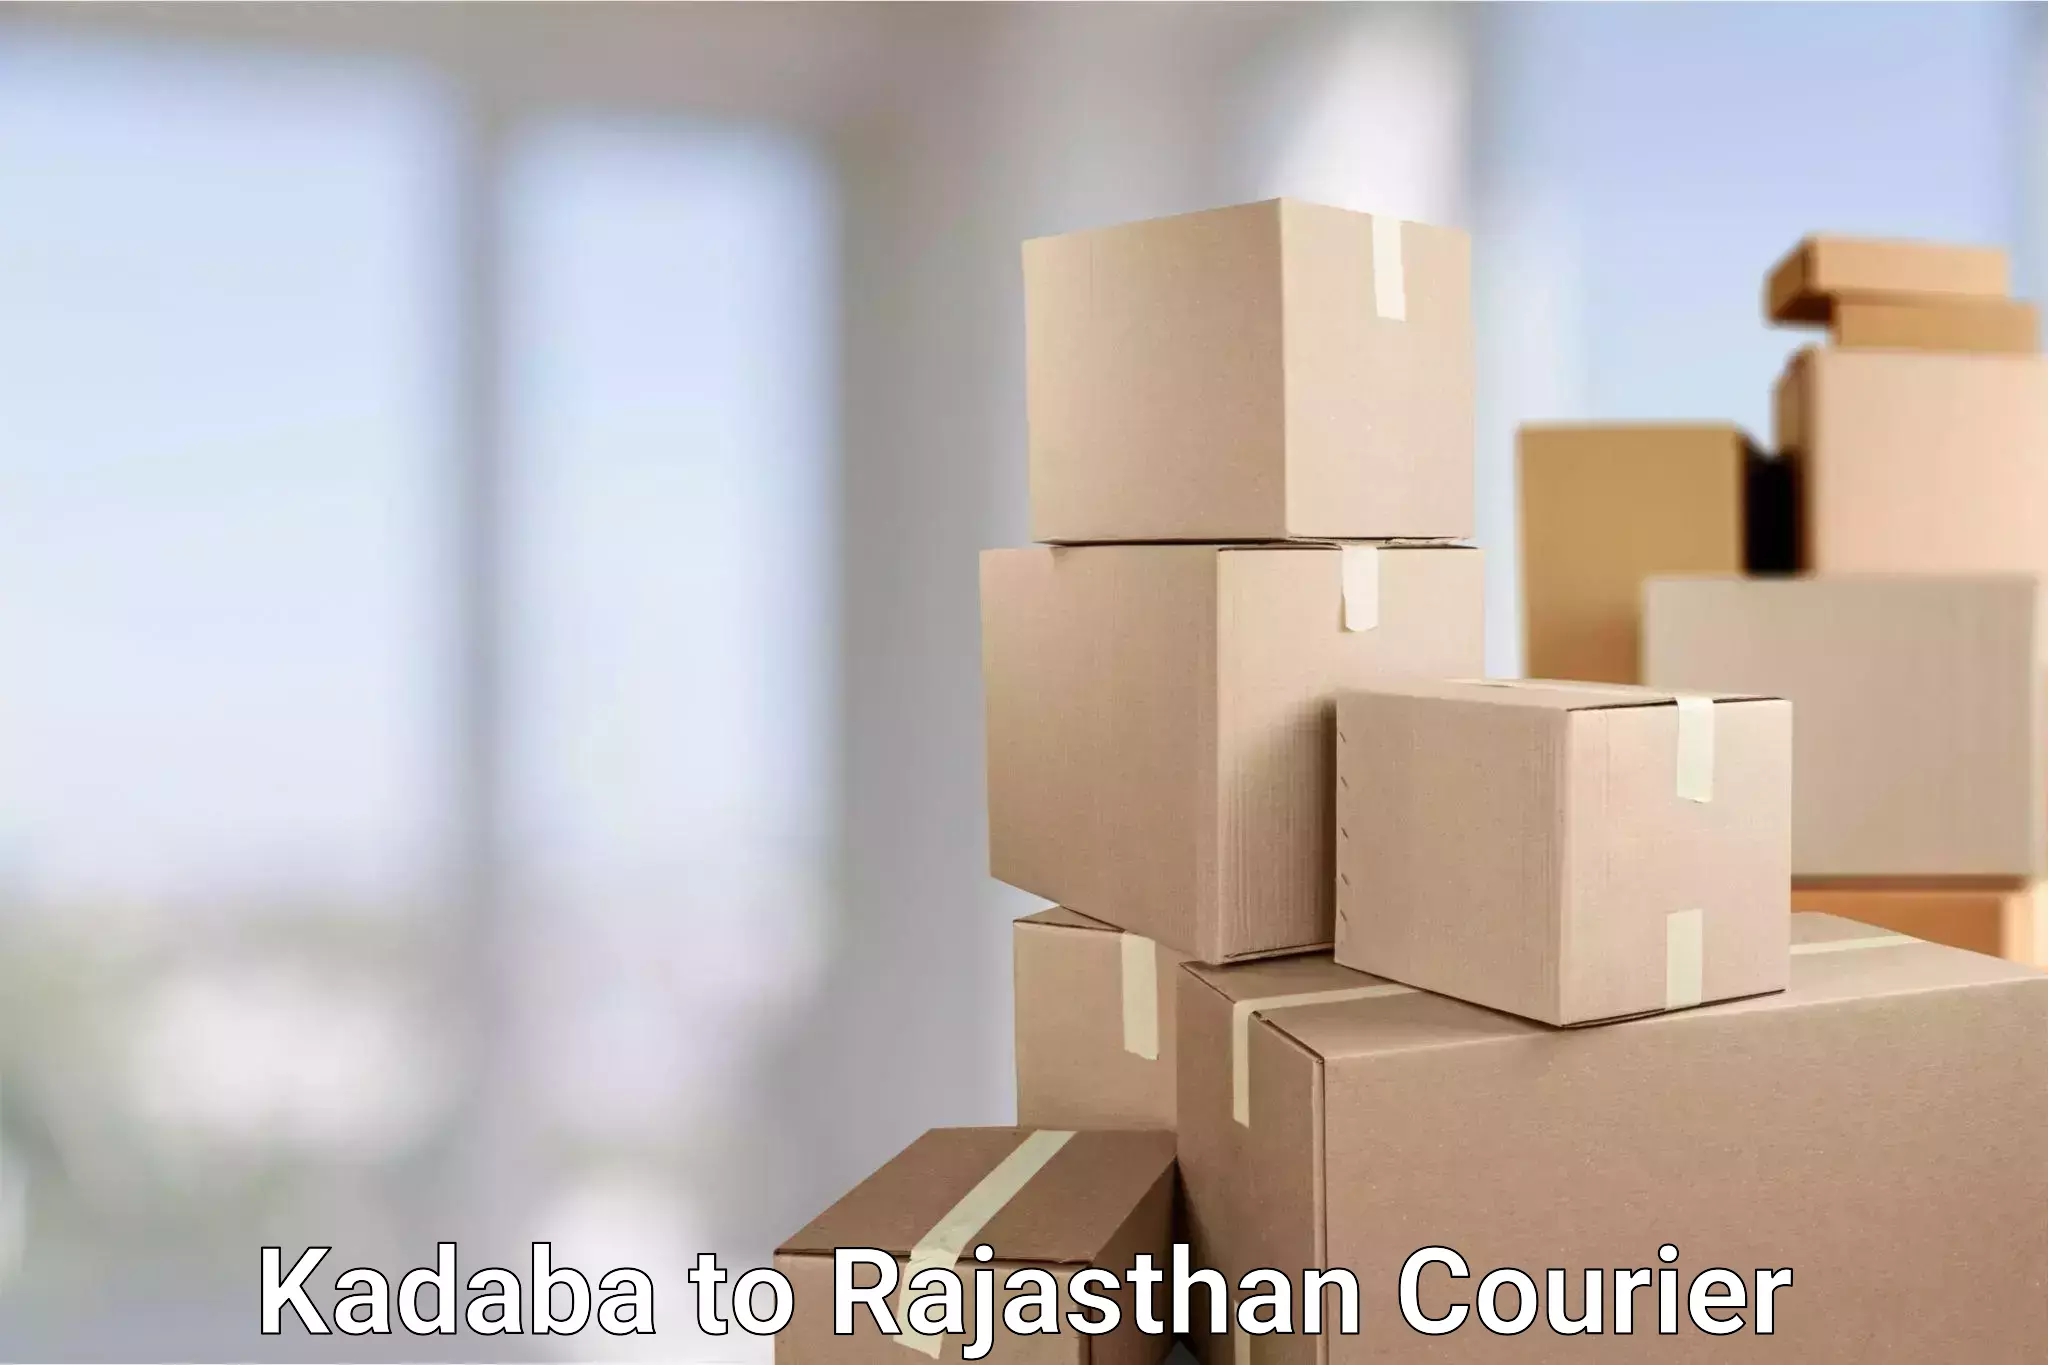 Subscription-based courier Kadaba to Weir